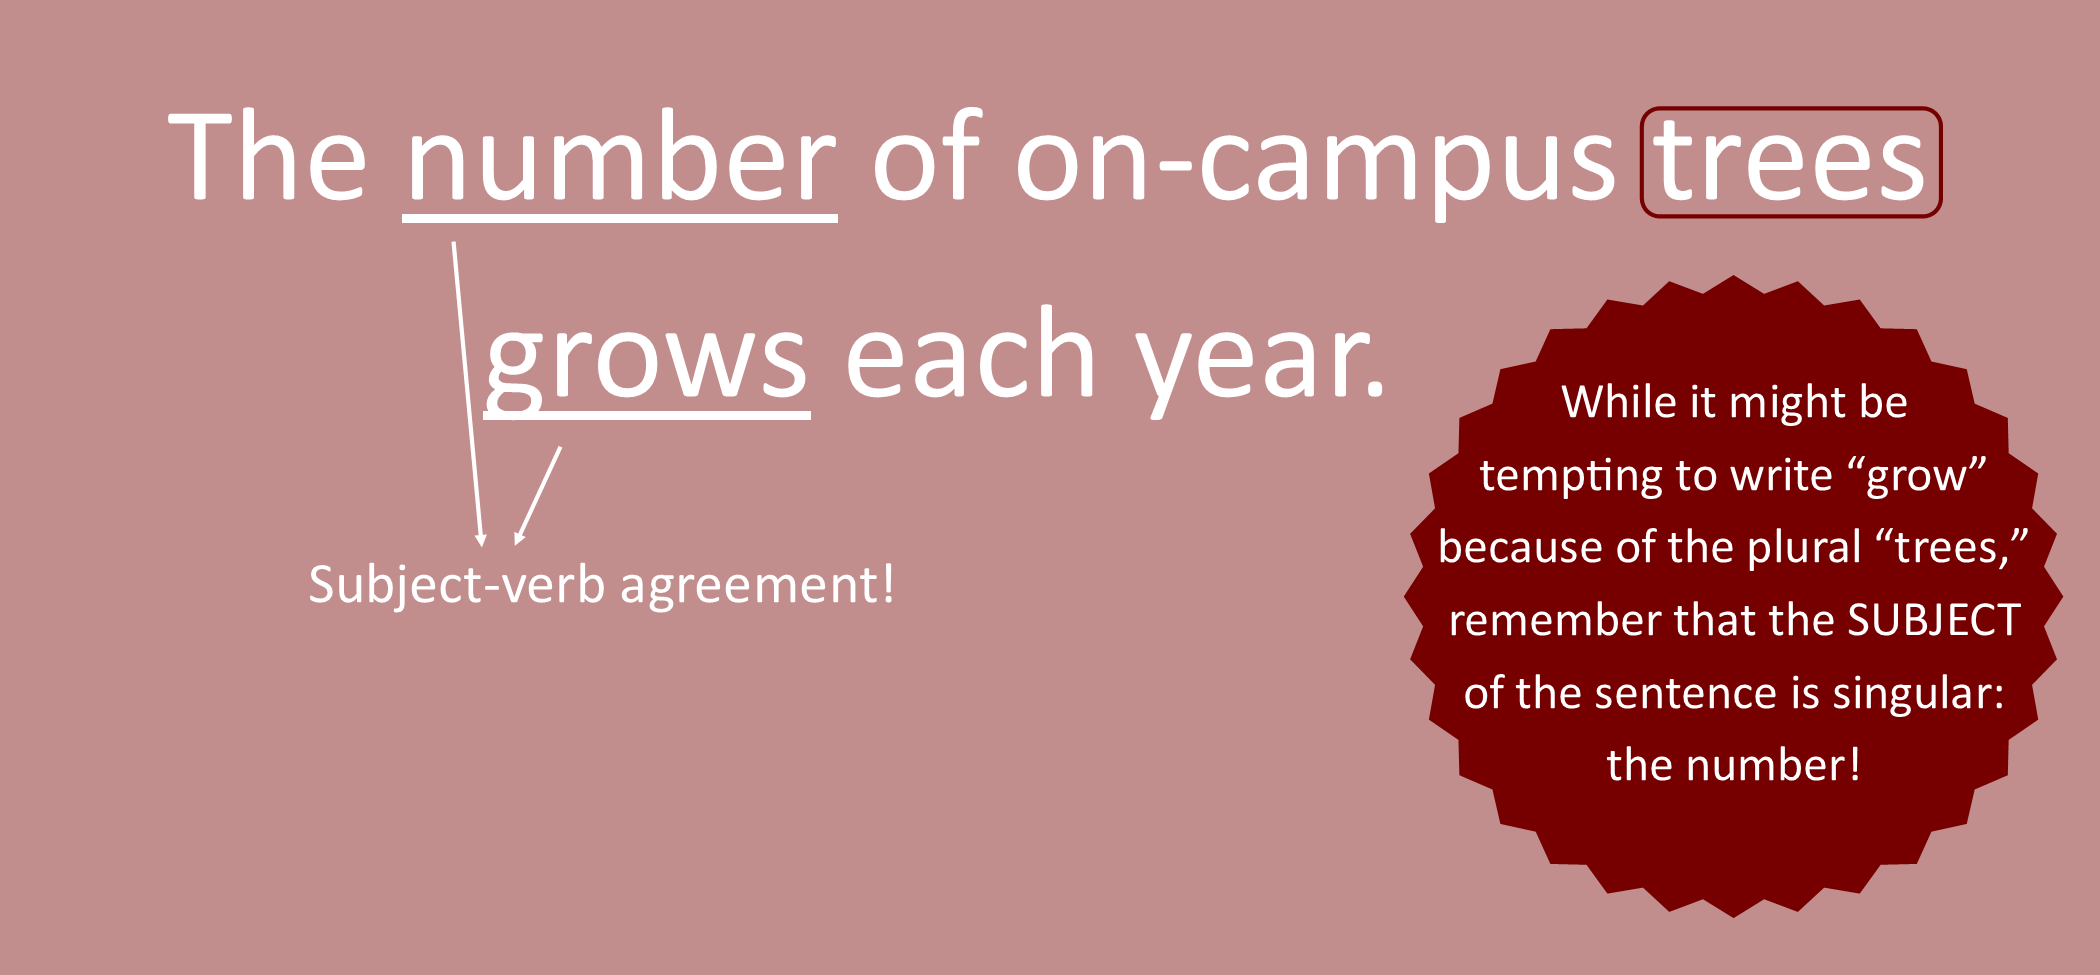 This graphic points out subject verb agreement in the sentence, "The number of on-campus trees grows each year." Arrows point from the noun "number" and the verb "grows" to the text "Subject-verb agreement!" to indicate that these are the subject and verb that agree. The noun "tree" is circled and accompanied by the following text: "While it may be tempting to write ’grow’ because of the plural ’trees,’’ remember that the SUBJECT of the sentence is singular: the number!"